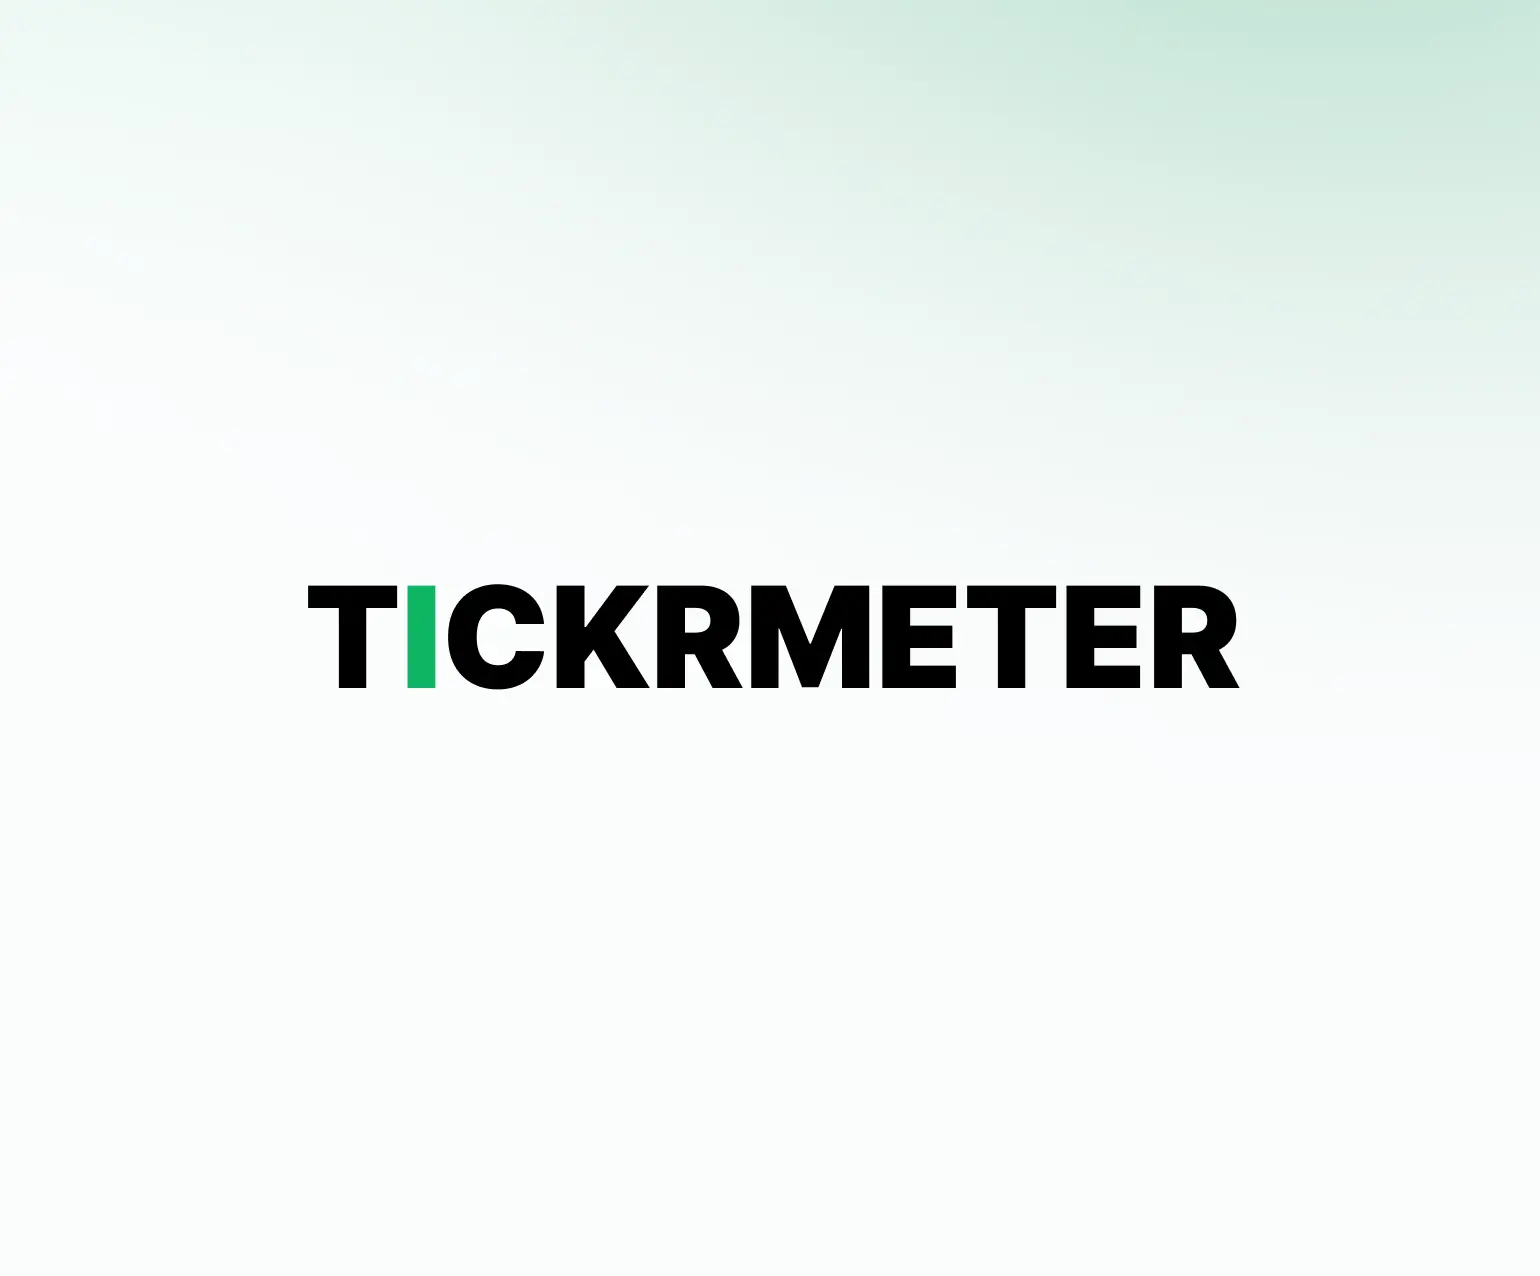 TickrMeter logo on faded green background